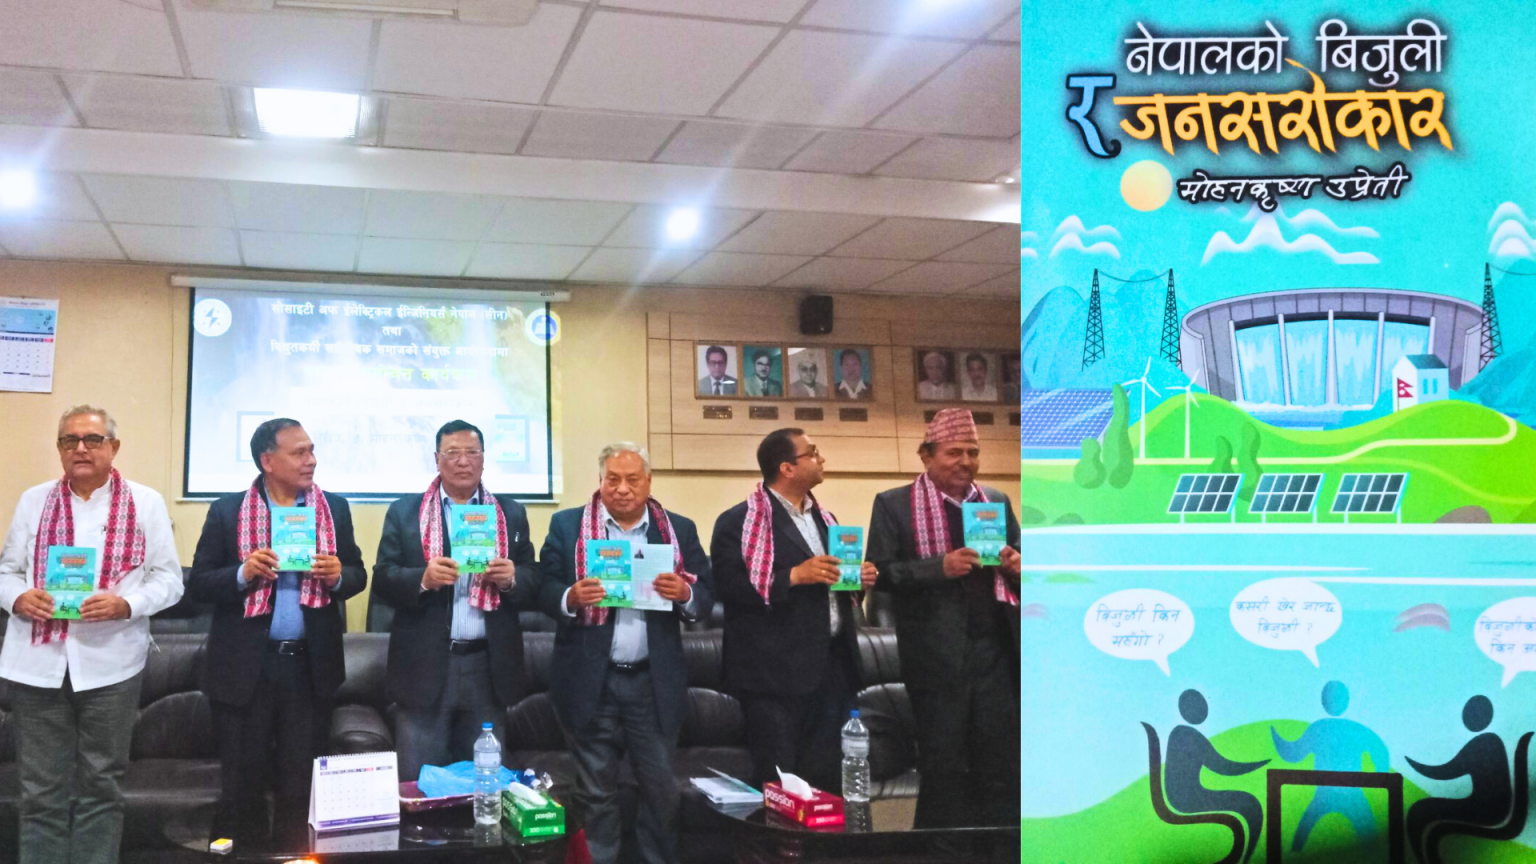 Upreti’s book ‘Nepal Electricity and Public Concerns’ in the market